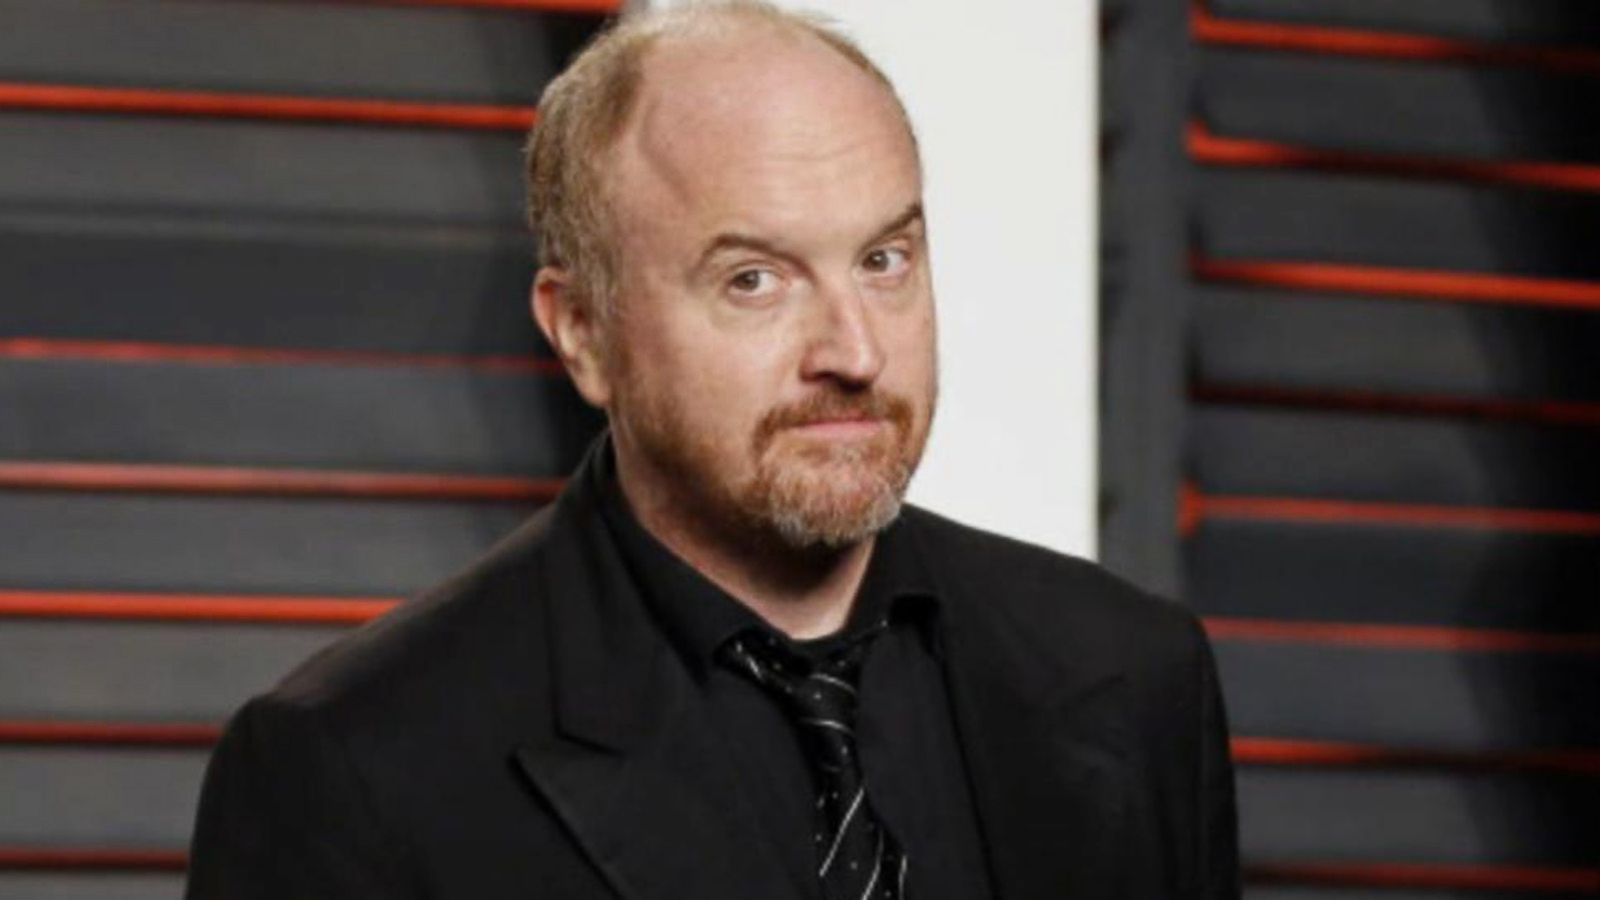 Comedian Louis Ck Accused Of Sexual Misconduct By 5 Women Good Morning America